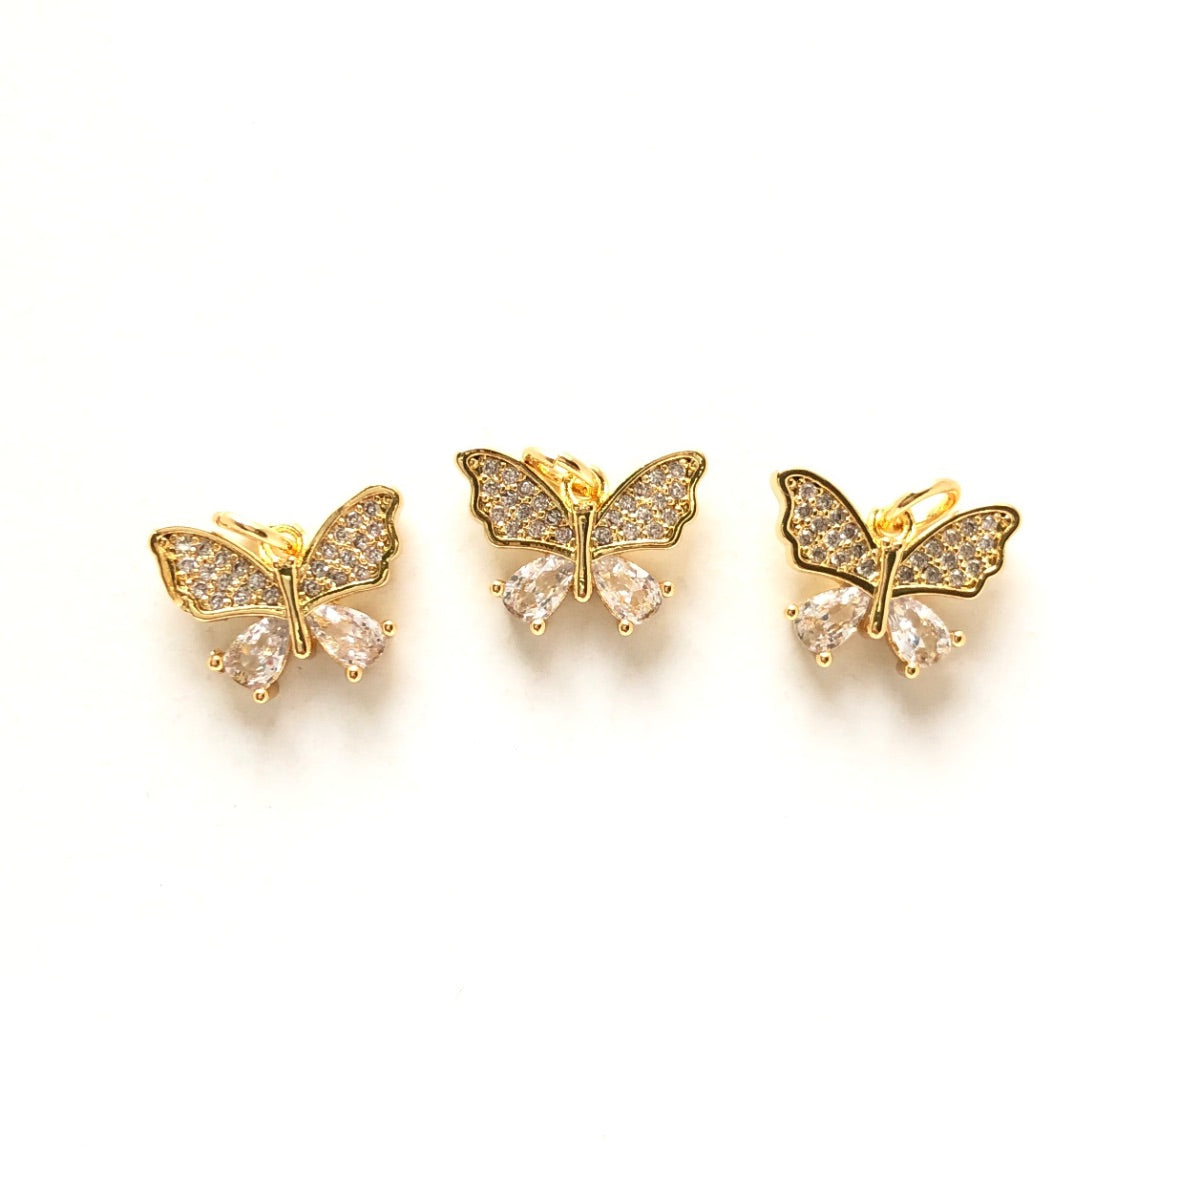 10pcs/lot 14*11mm Small Size CZ Pave Butterfly Charms Gold CZ Paved Charms Butterflies Small Sizes Charms Beads Beyond